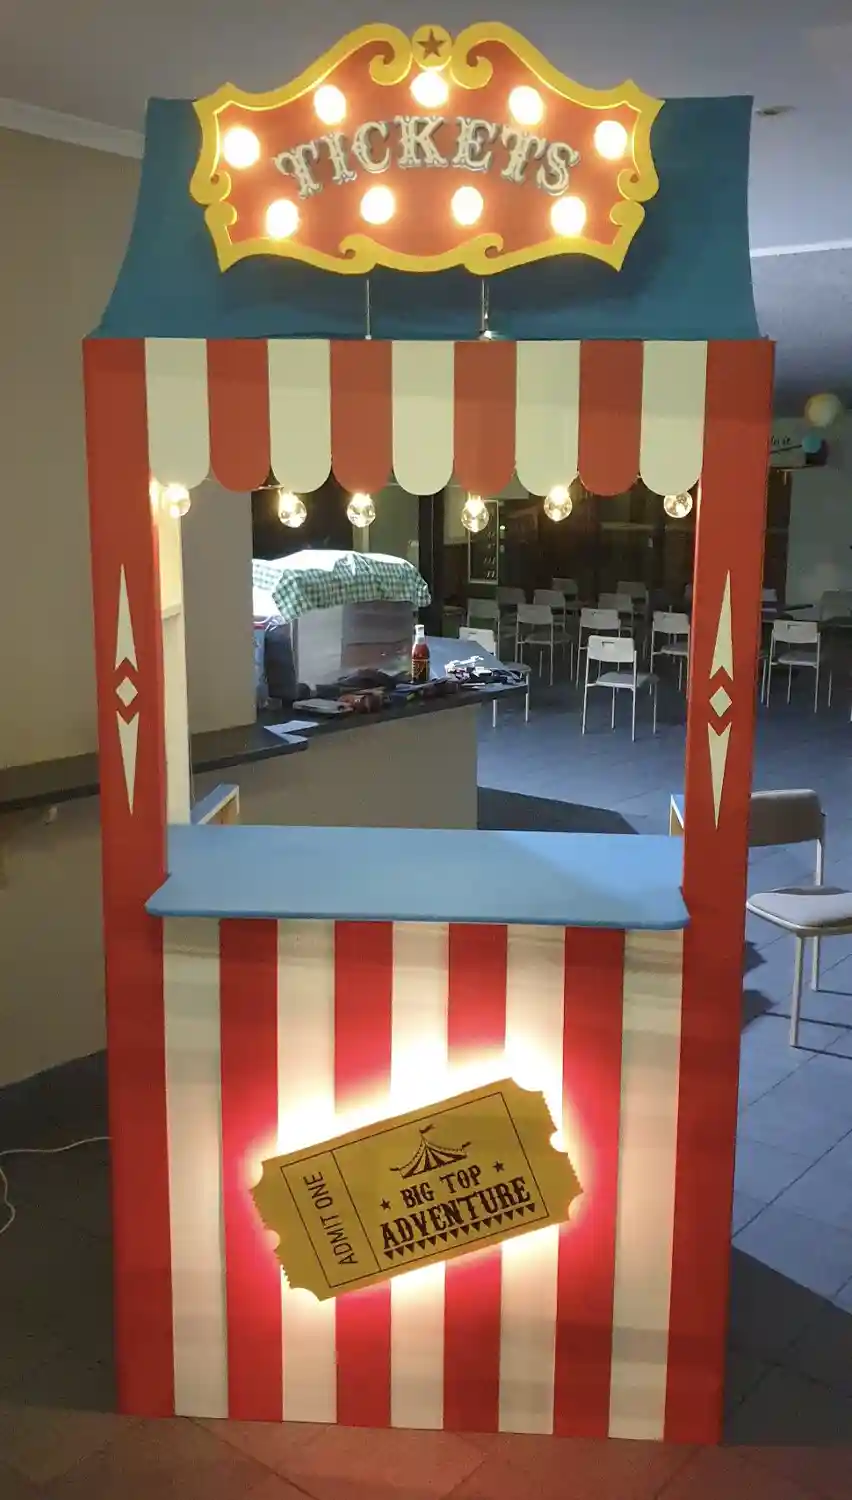 Carnival Party Ideas - Carnival Ticket Booth - source uknown